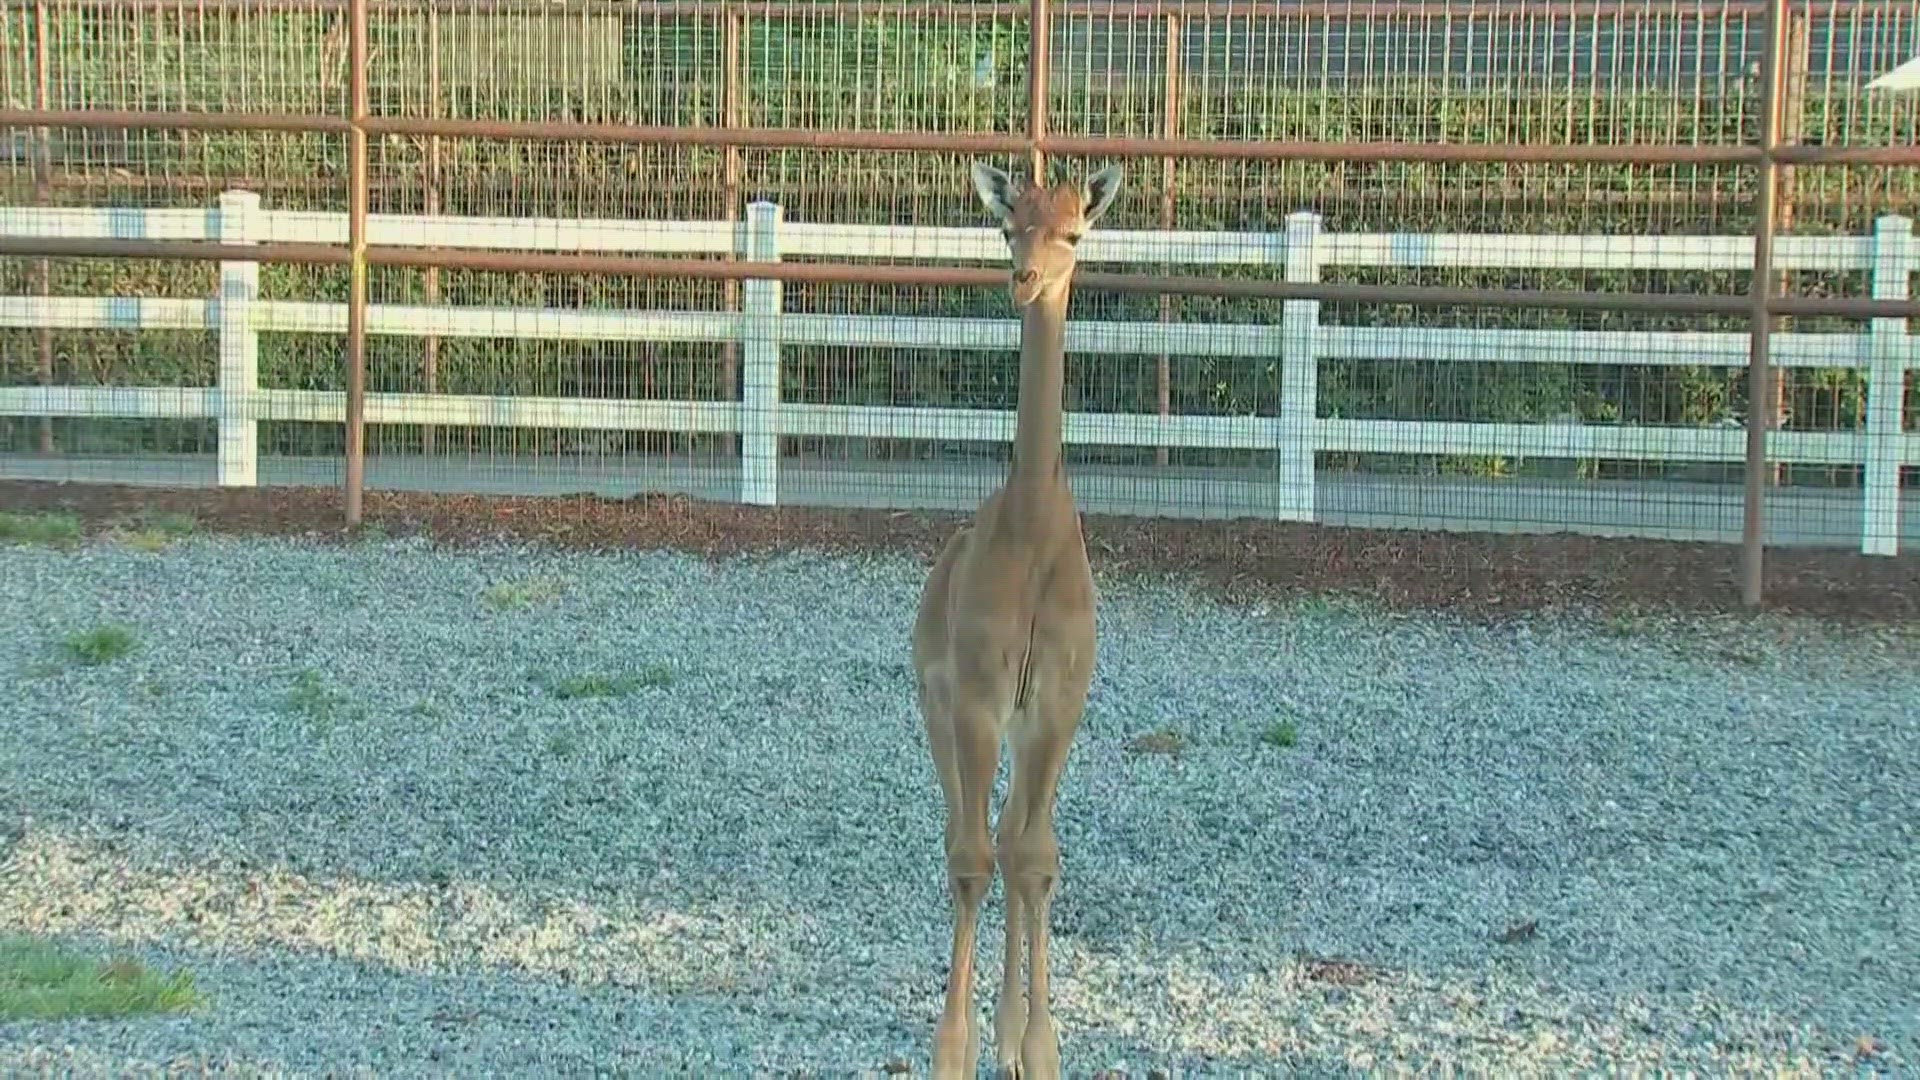 The spotless giraffe recently born at Brights Zoo in Tennessee is believed to be the only giraffe in the world without spots, and its name reflects that.